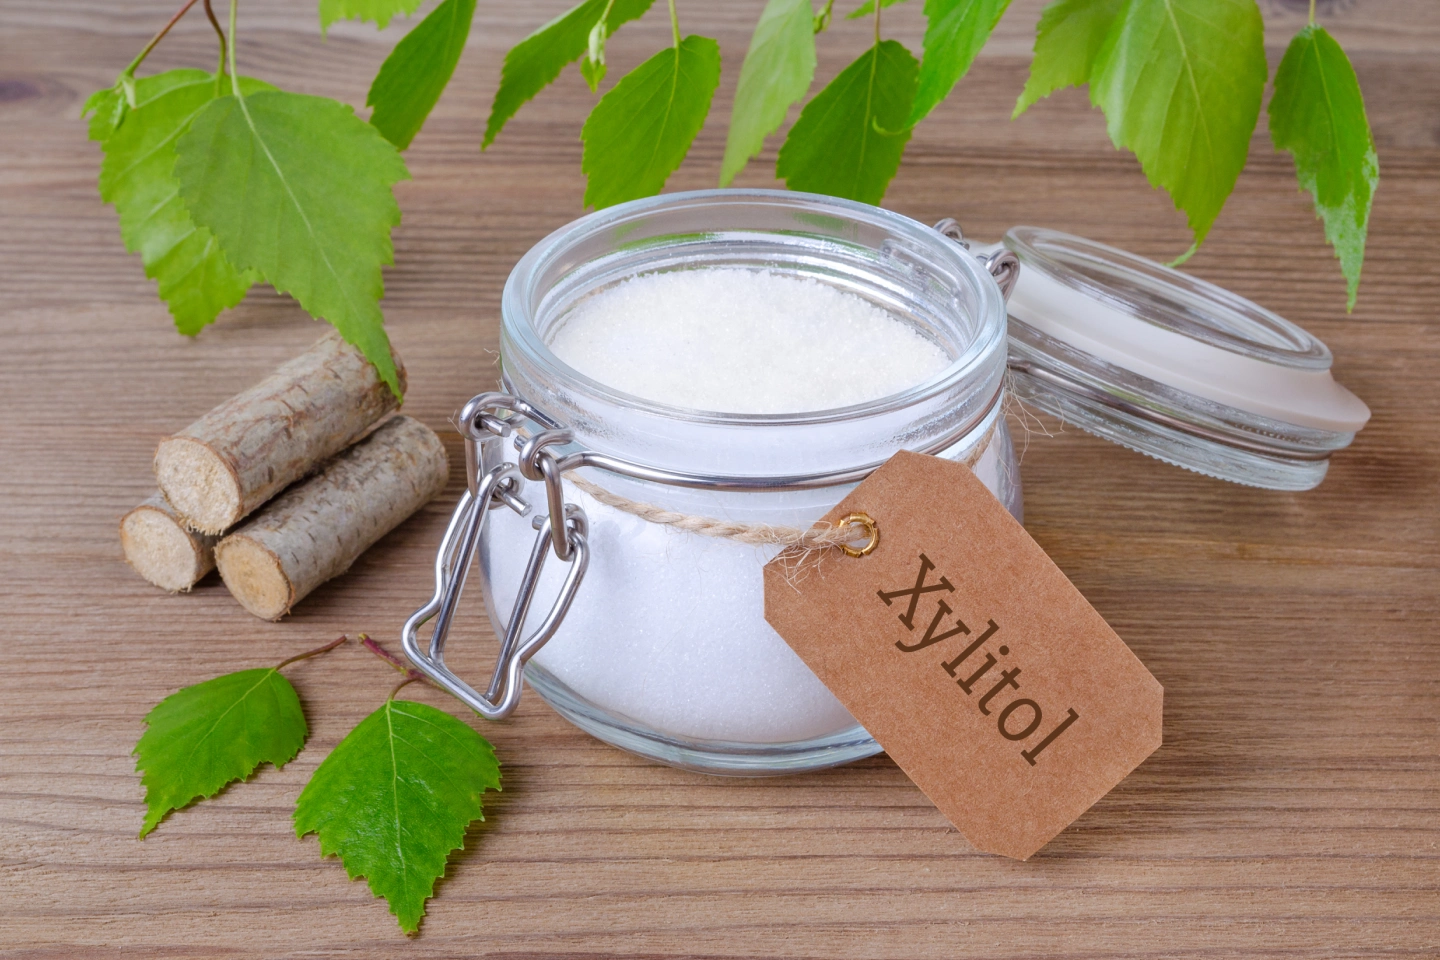 Xylitol – Reducing Cavities (for pediatric patients)